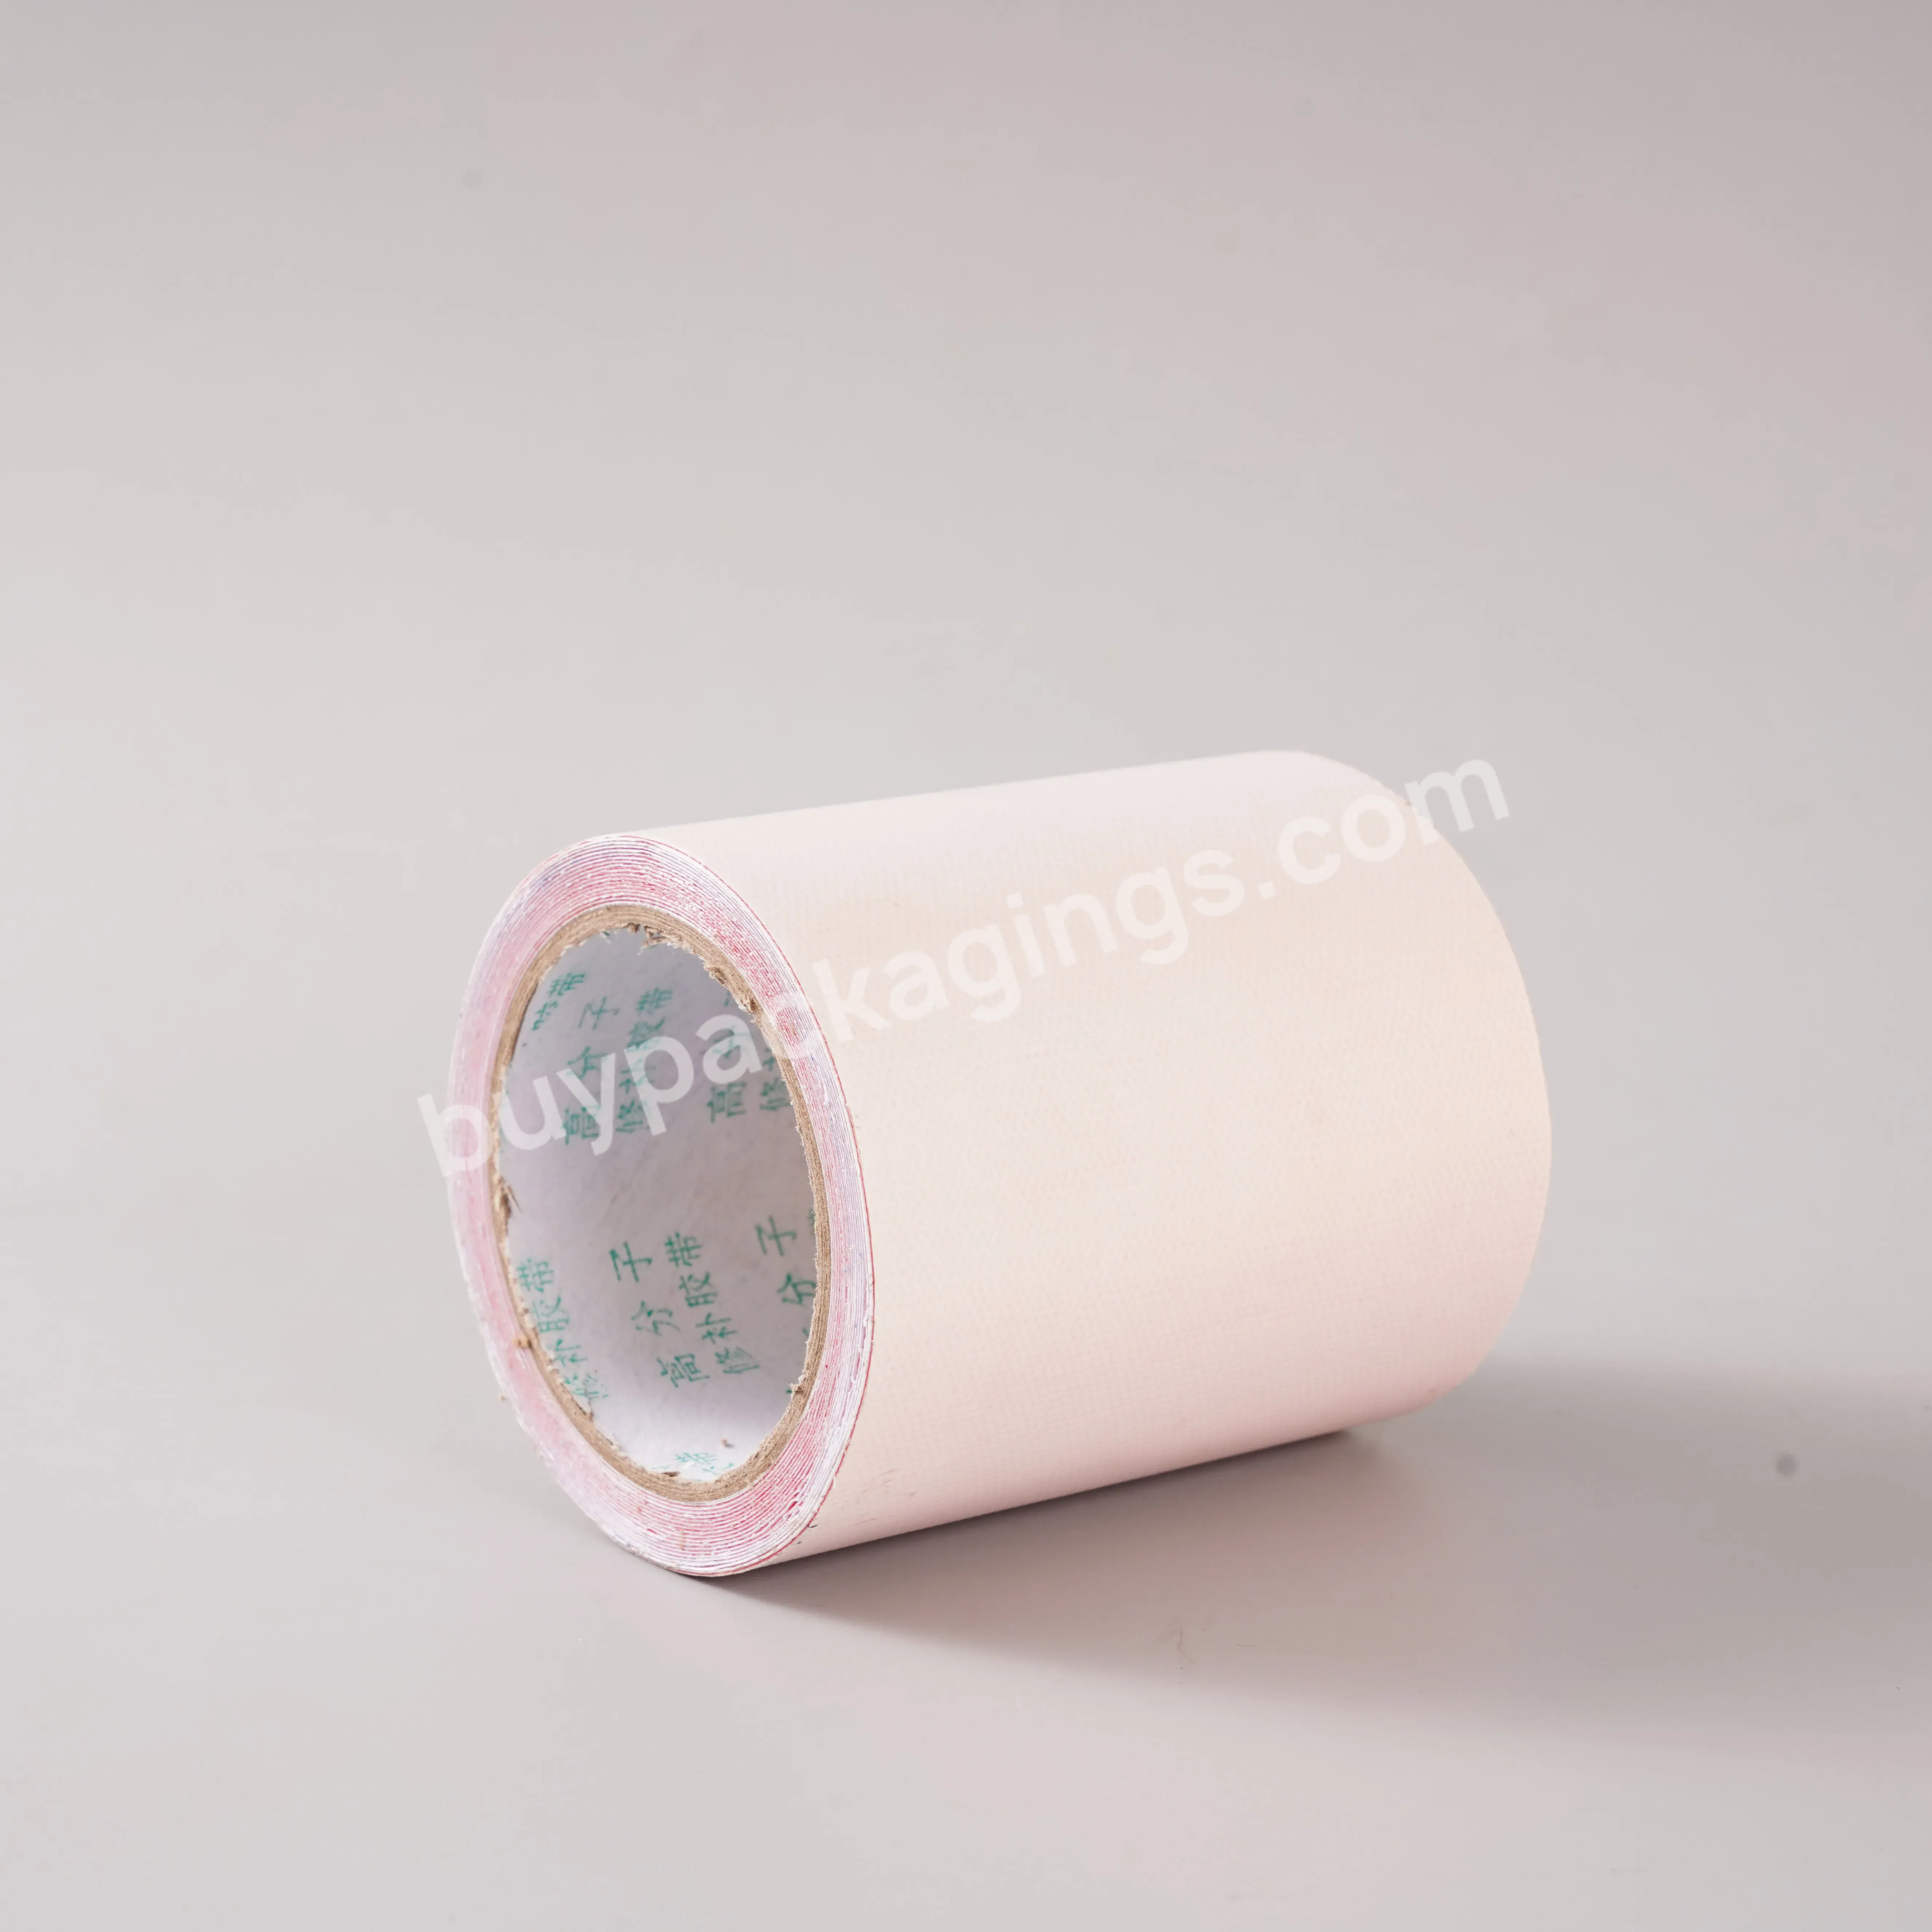 Waterproof And Leaky Tarpaulin Repair Tape For Outdoor Tent And Truck Cargo Shelter - Buy Tarpaulin Waterproof Tape,Waterproof Self-adhesive Repair Tape,Free Sample Tarpaulin Repair Tape.